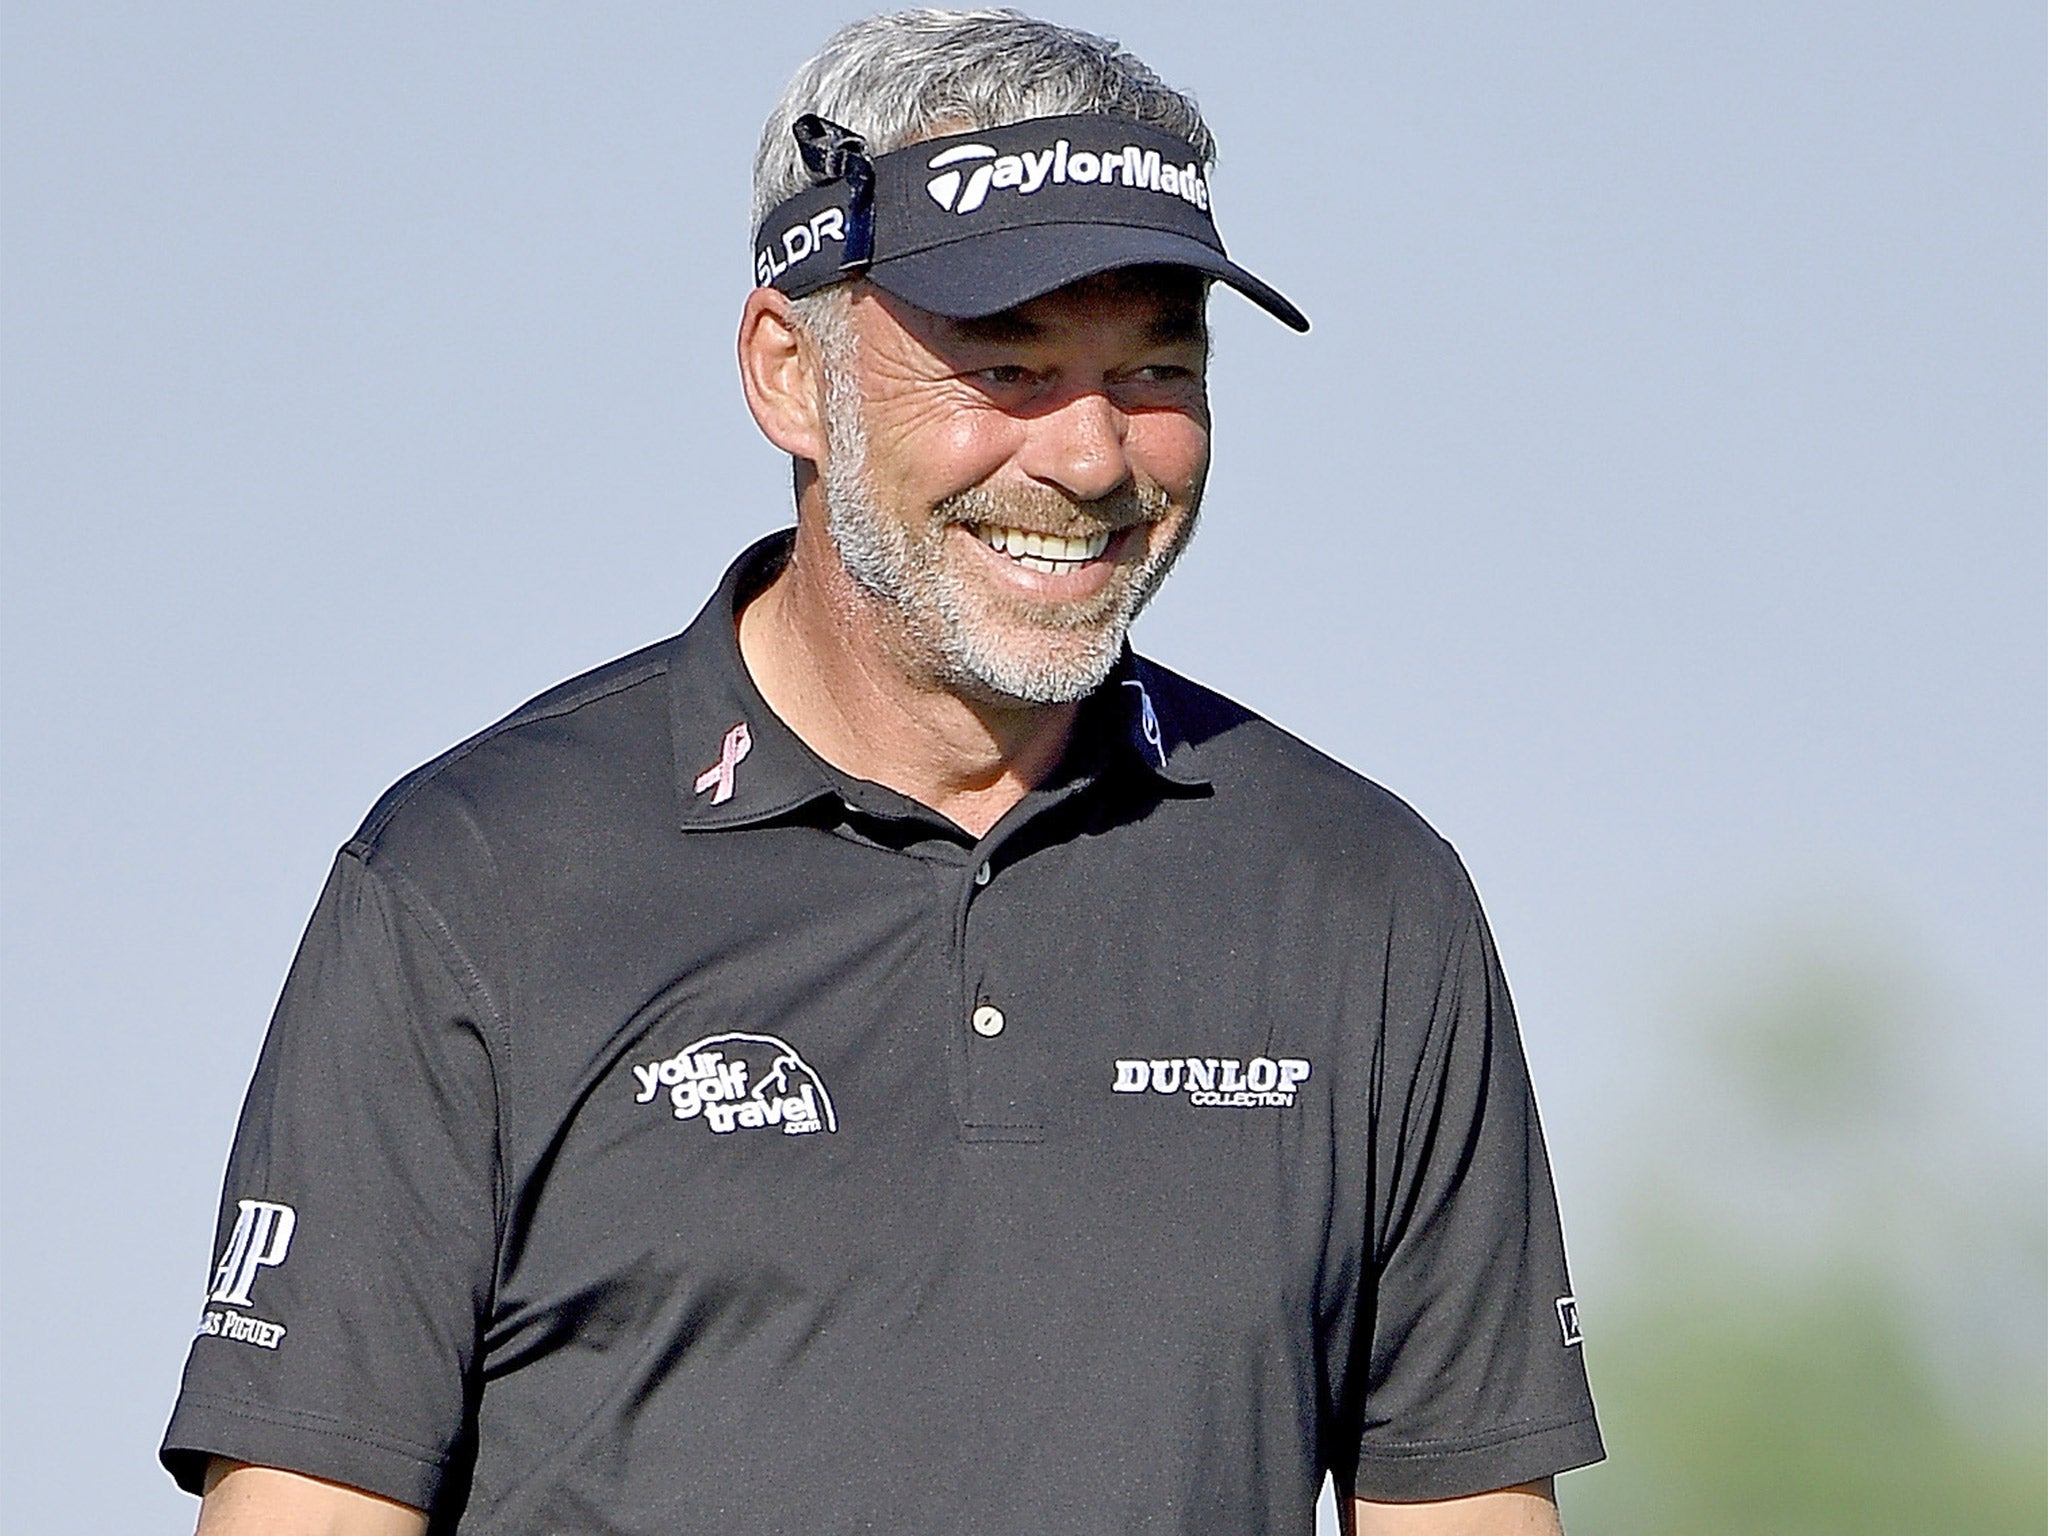 Darren Clarke has the support of world No 1 Rory McIlroy